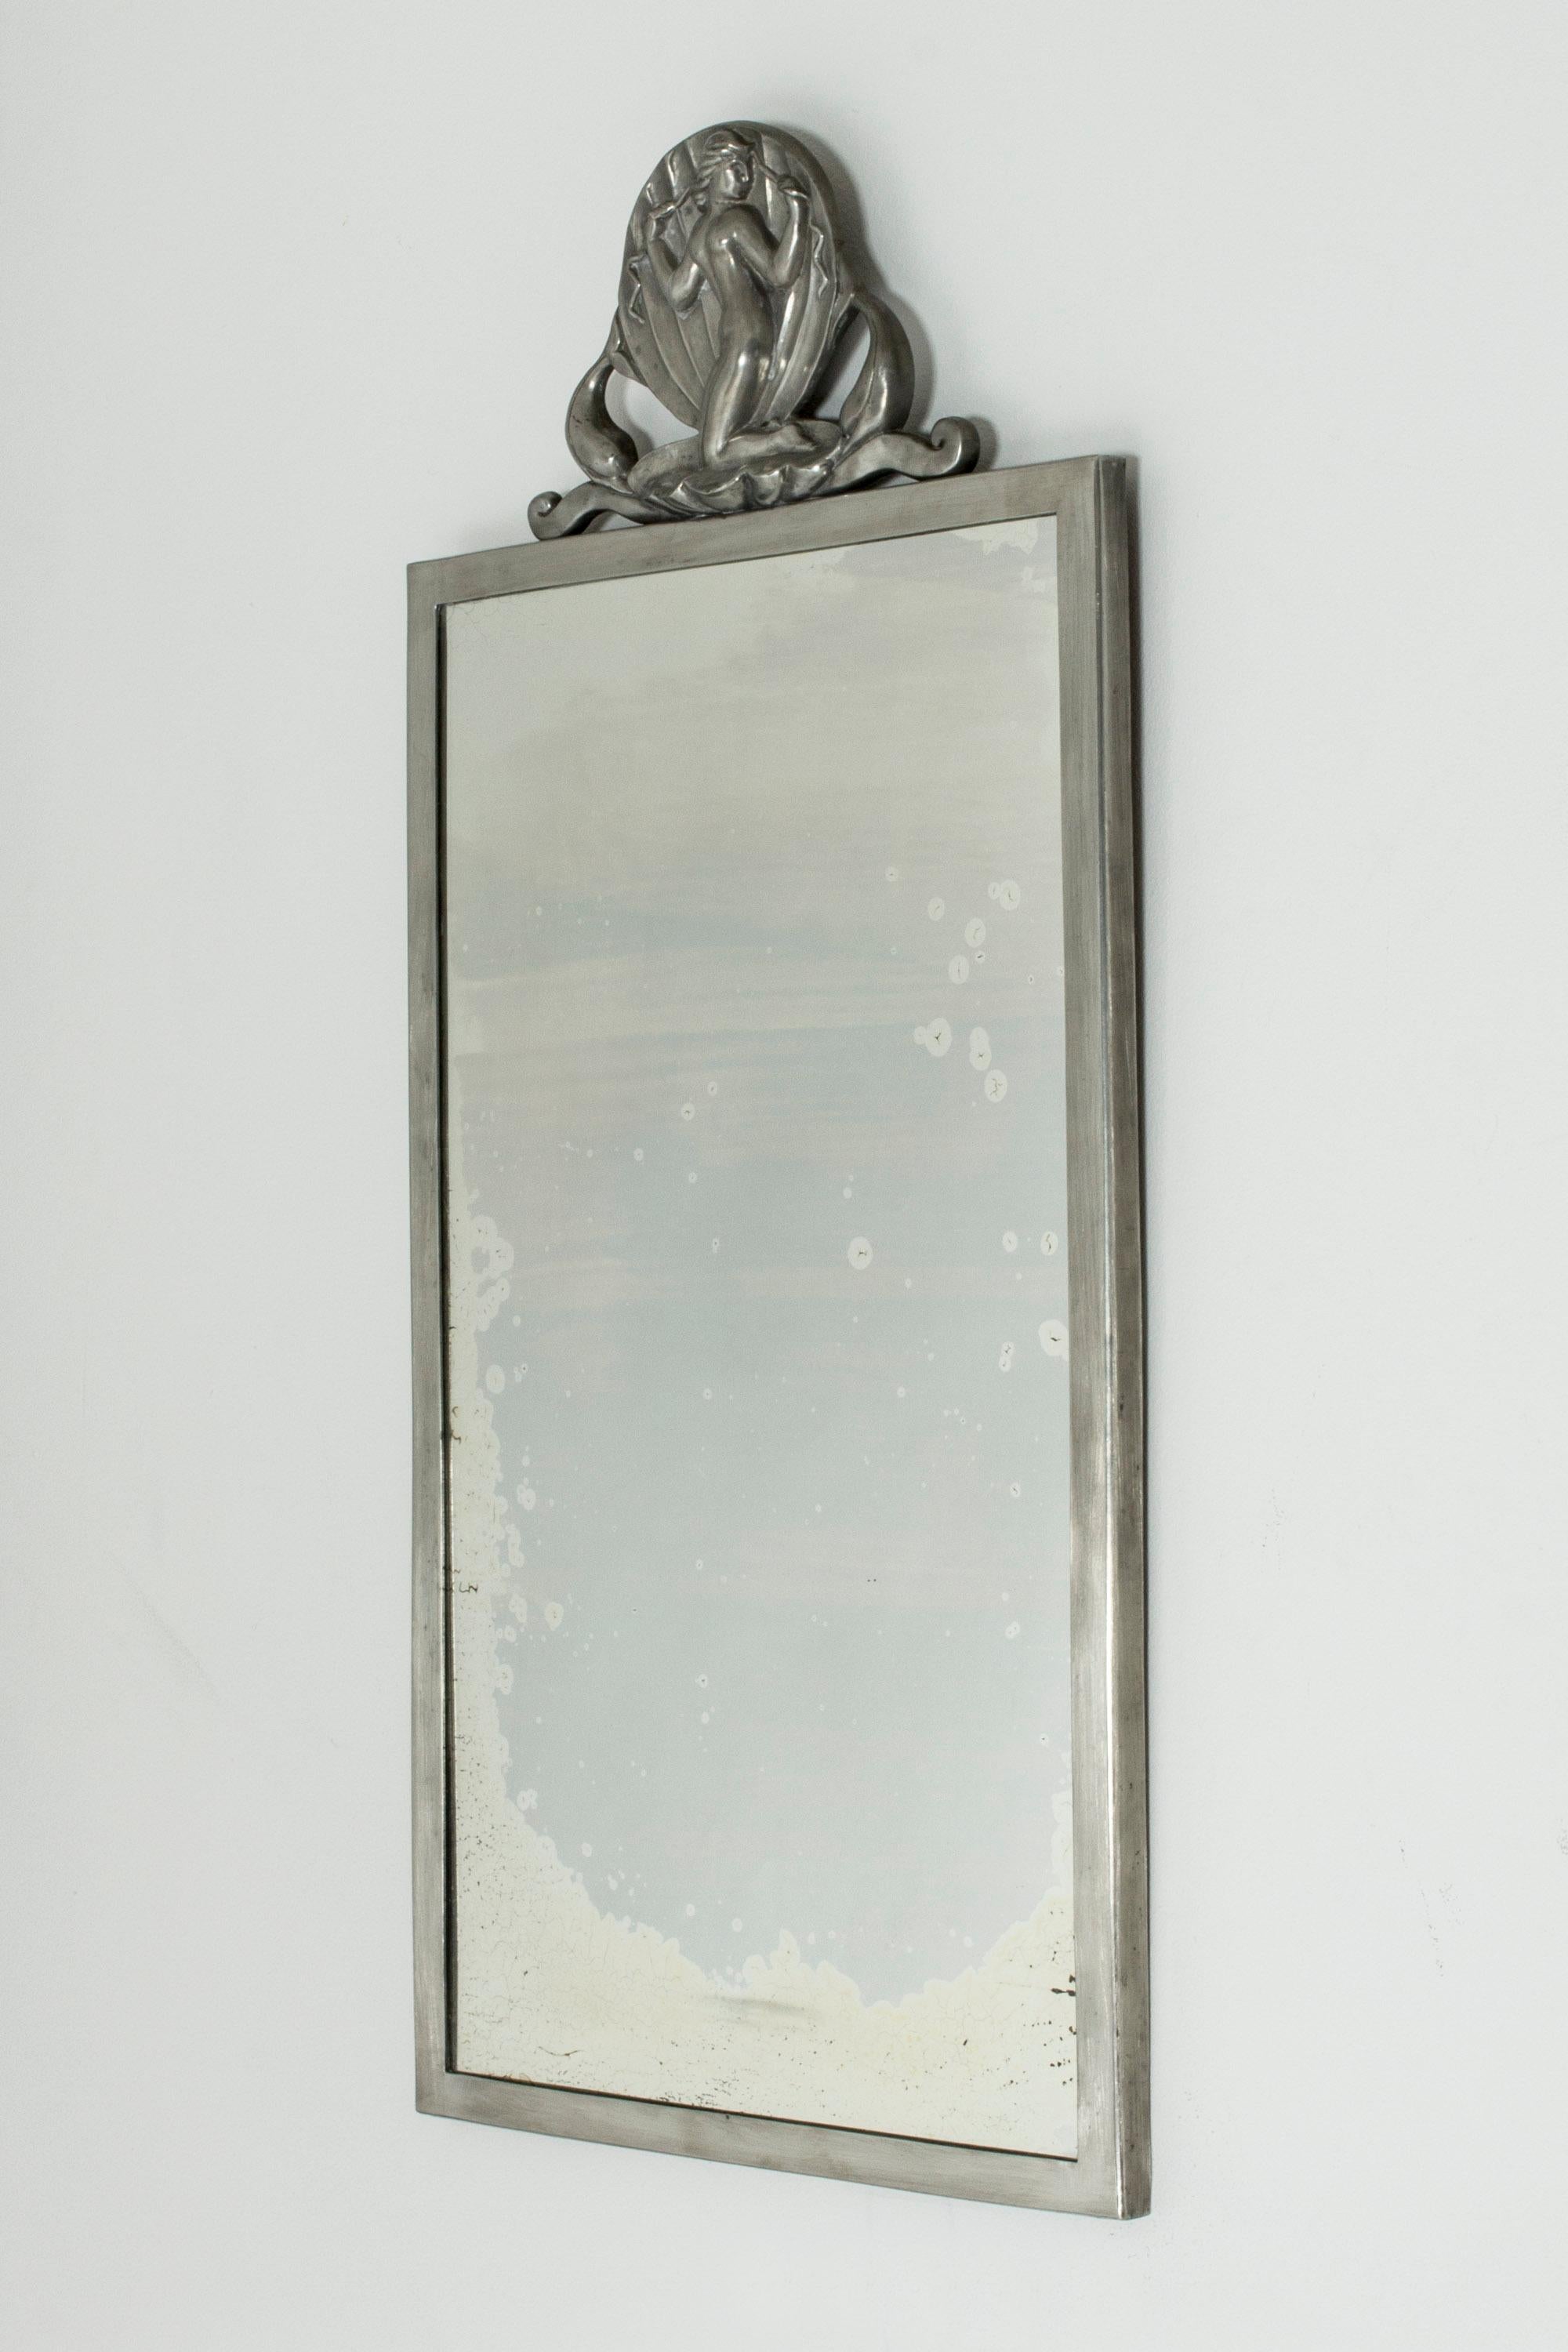 Pewter wall mirror from Ystad Metall, in a strict, simple shape. Contrasting, elaborate decoration on top, showing a beautiful Venus inside a shell, flanked by dolphins.

Literature: Eriksson, Jonas Barros. Ystad-Metall 1919-1969. Bokförlaget